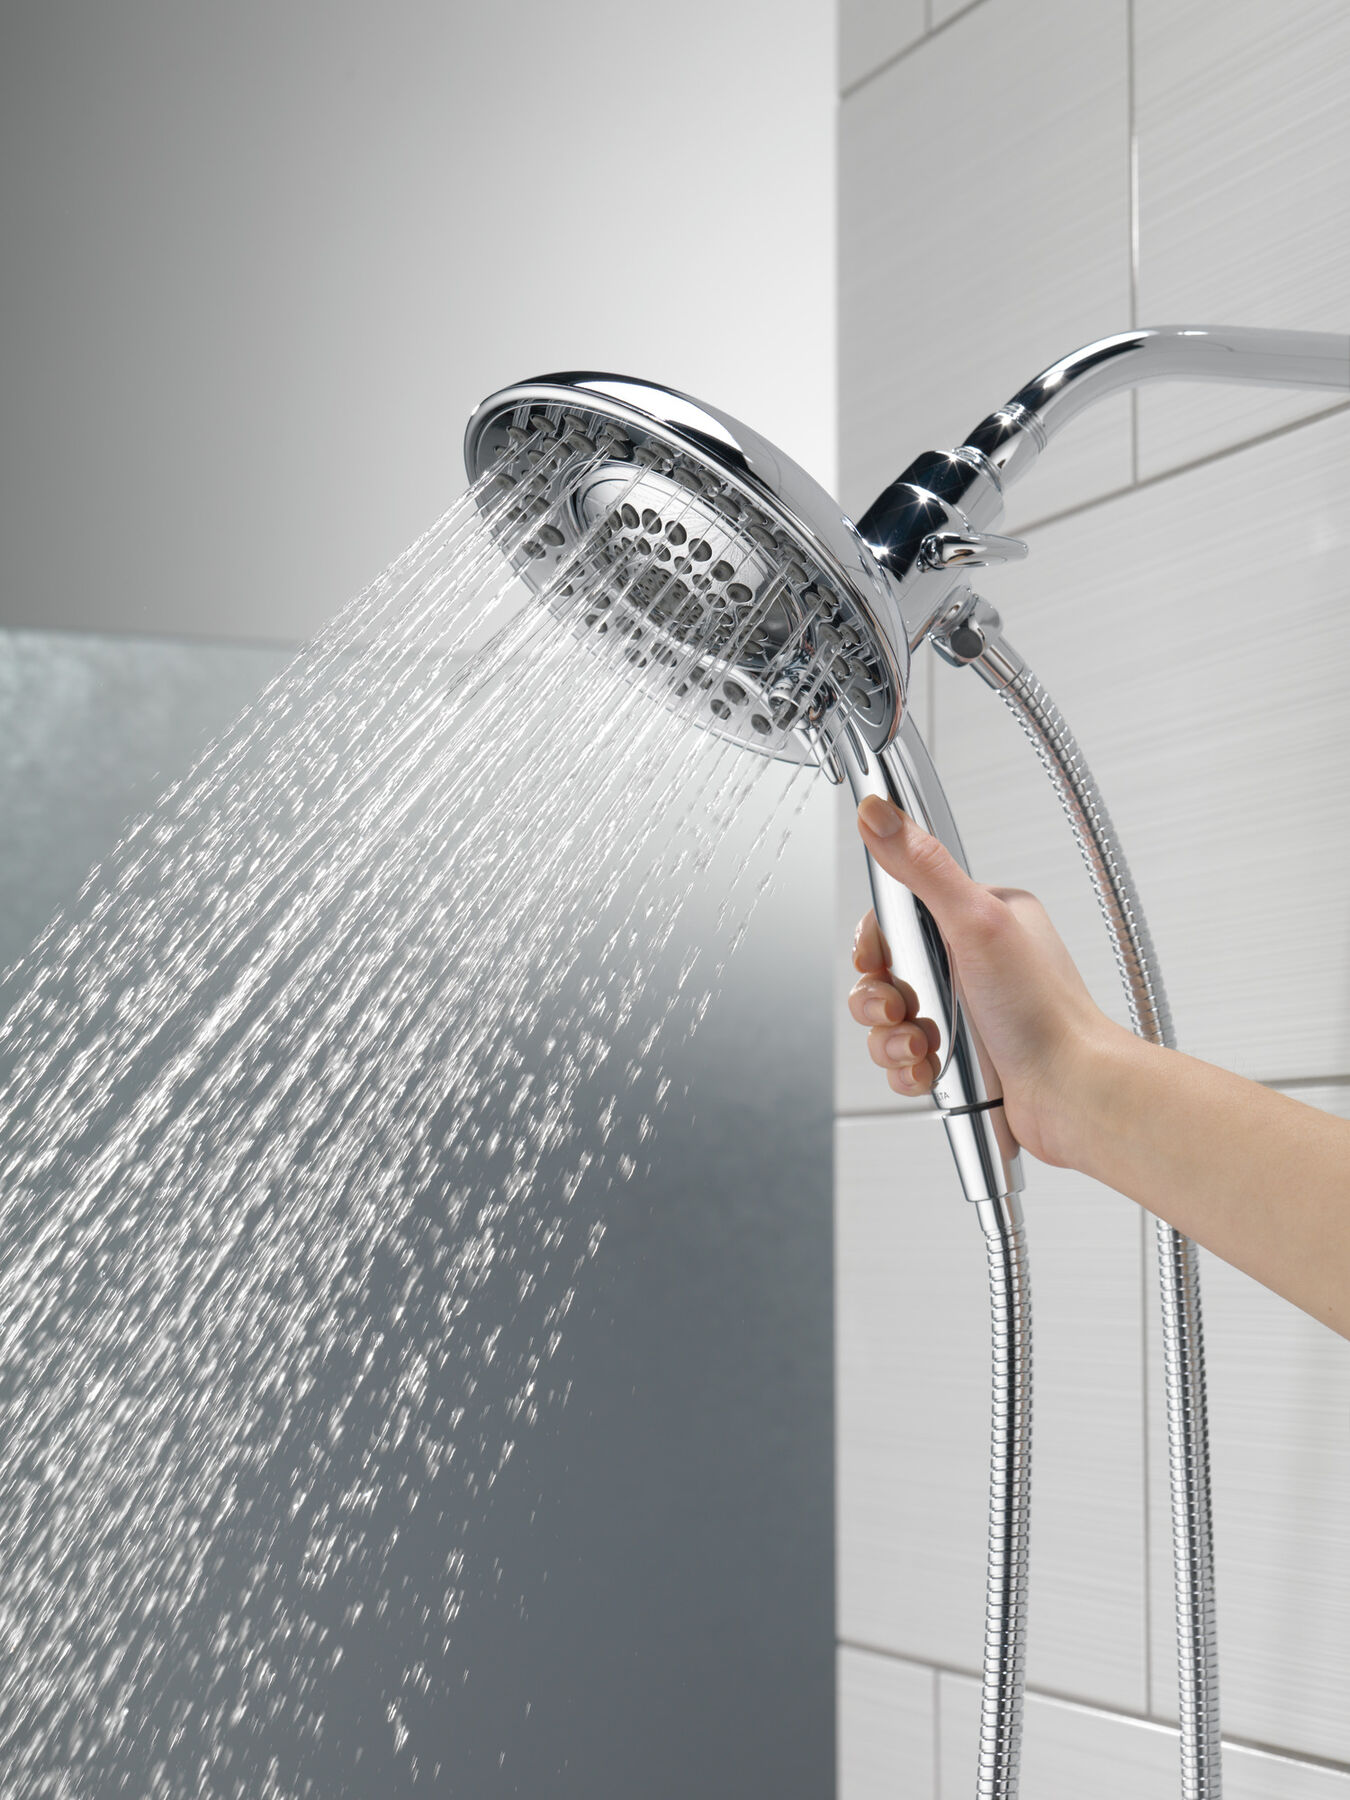 Suction Cup Handheld Shower Head Holder - 5 Angles Adjustable - Unique  Horizontal Setting - Large Shower Head Supports, Relocatable - Wall Mounted